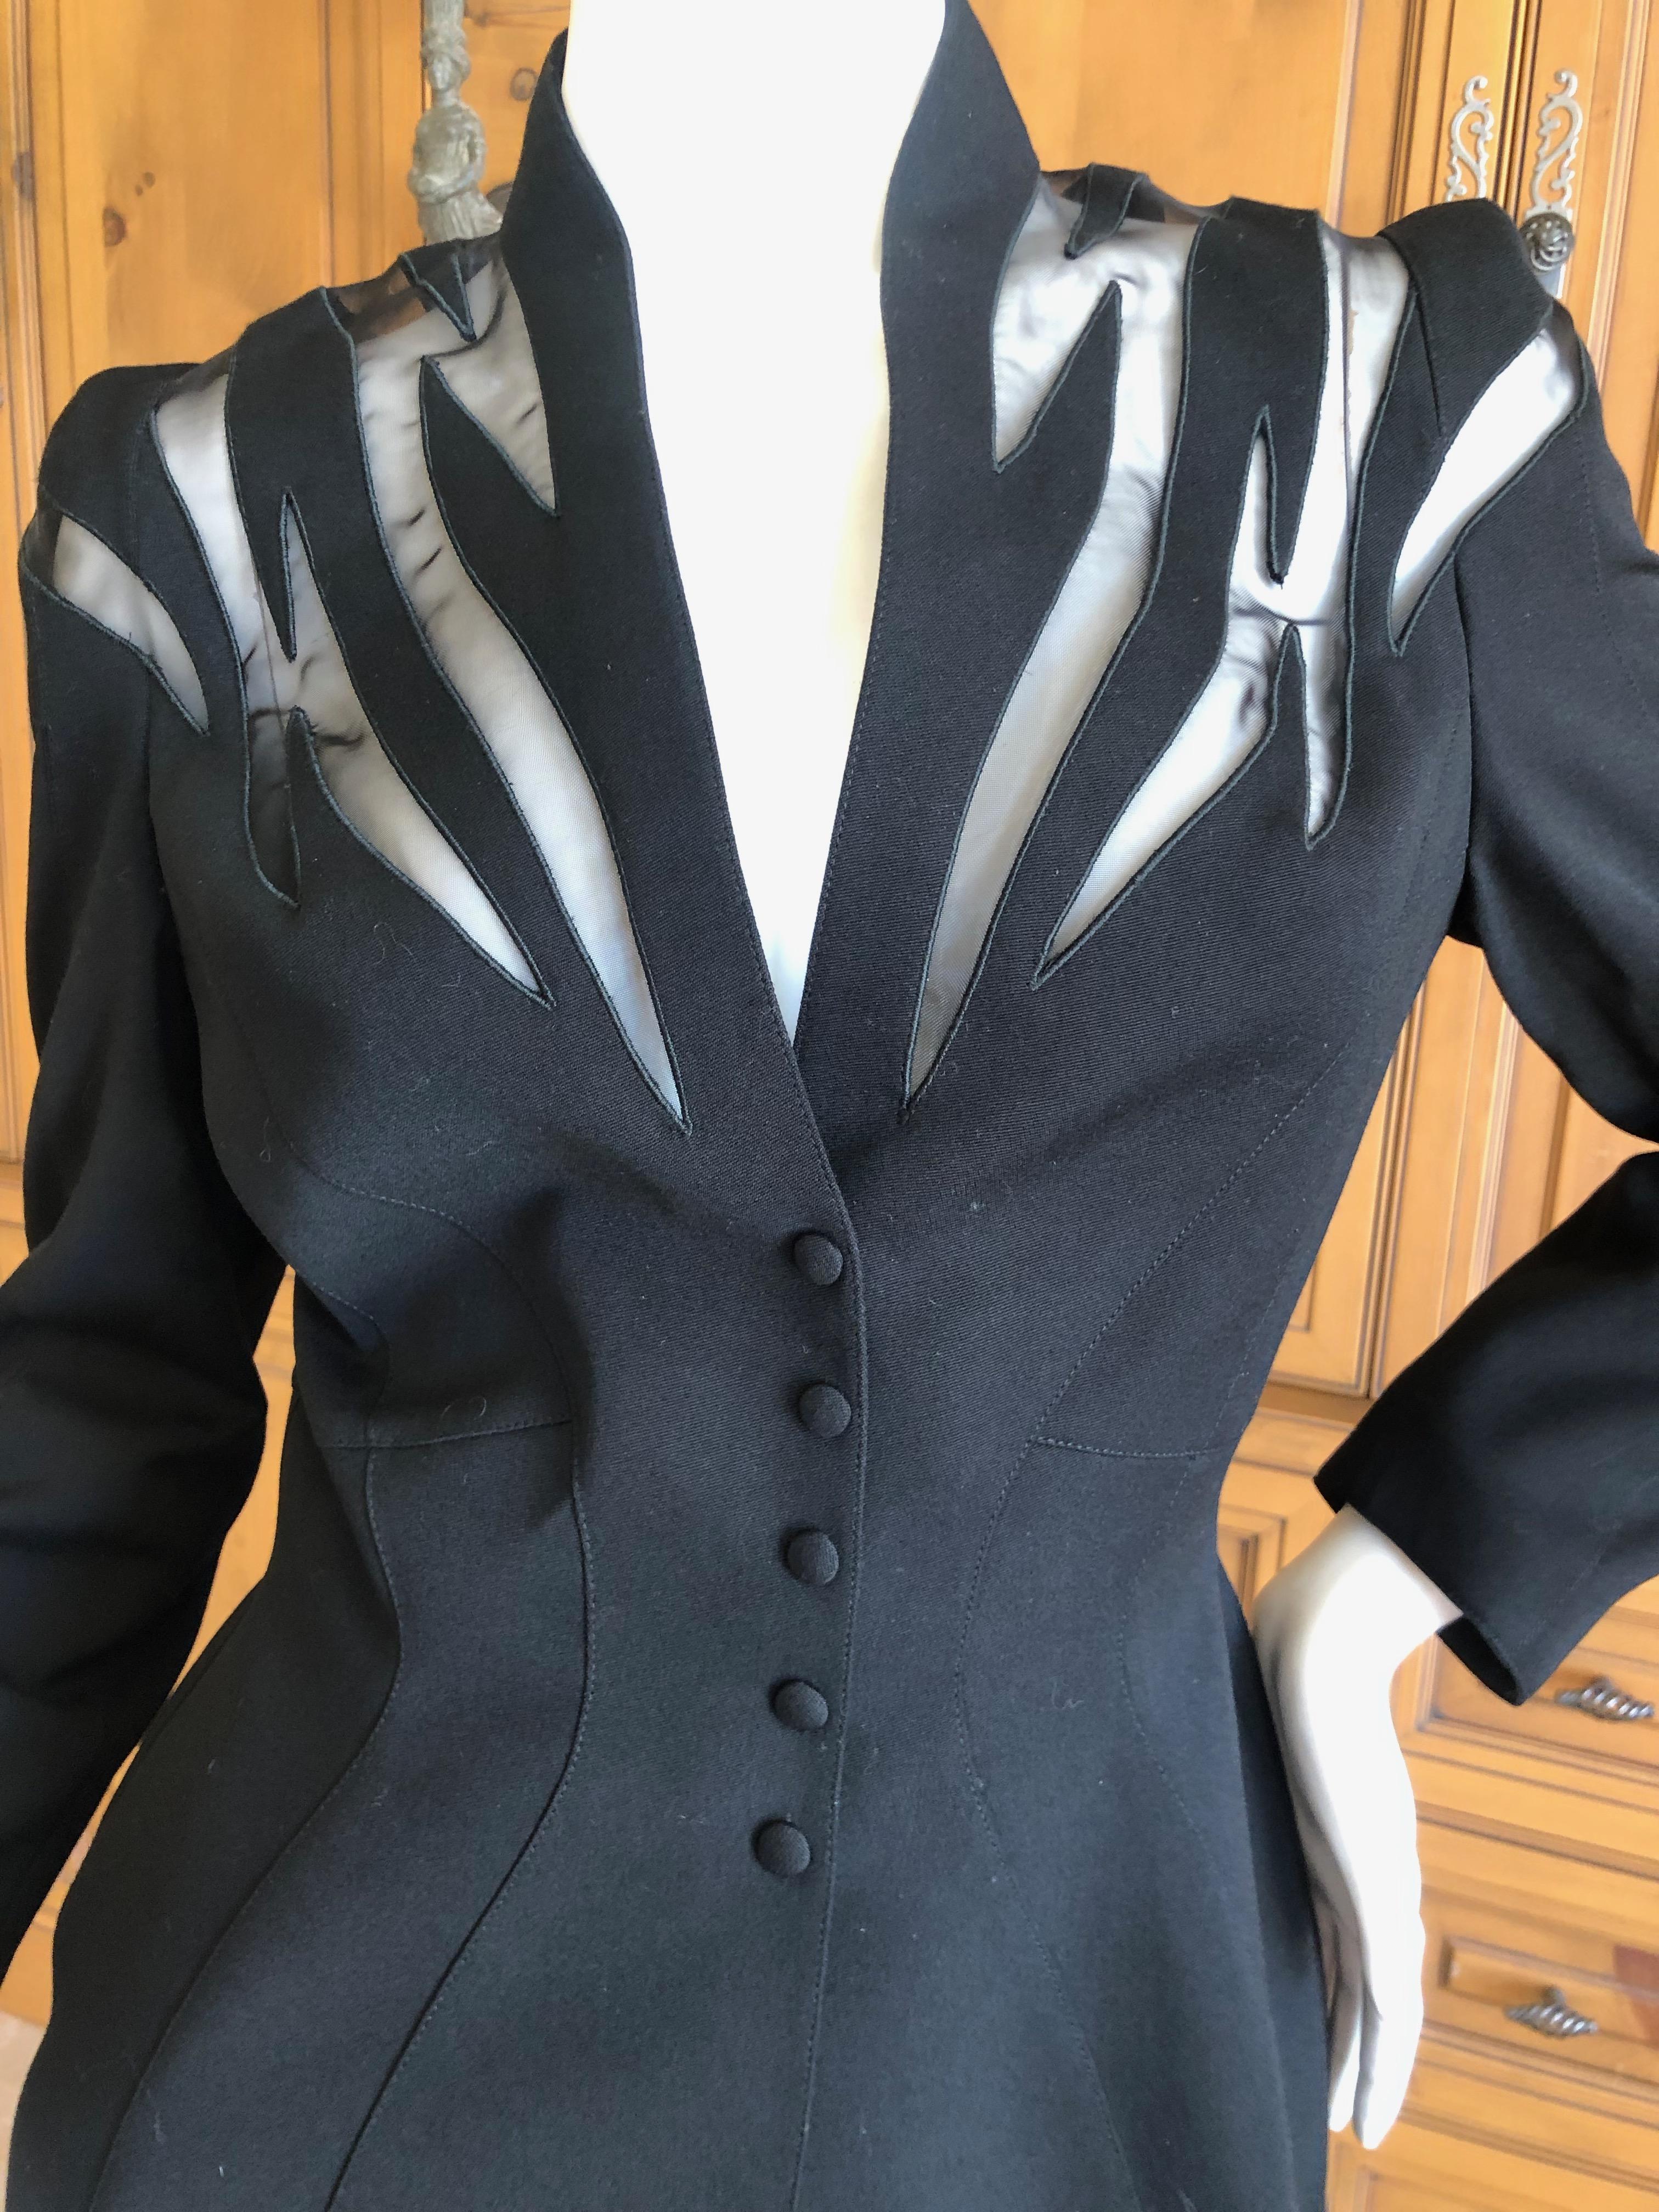 Thierry Mugler Vintage 1980's Black Peplum Suit with Sheer Flame Pattern Details
Size 38
 Classic Mugler 
Jacket
Bust 36